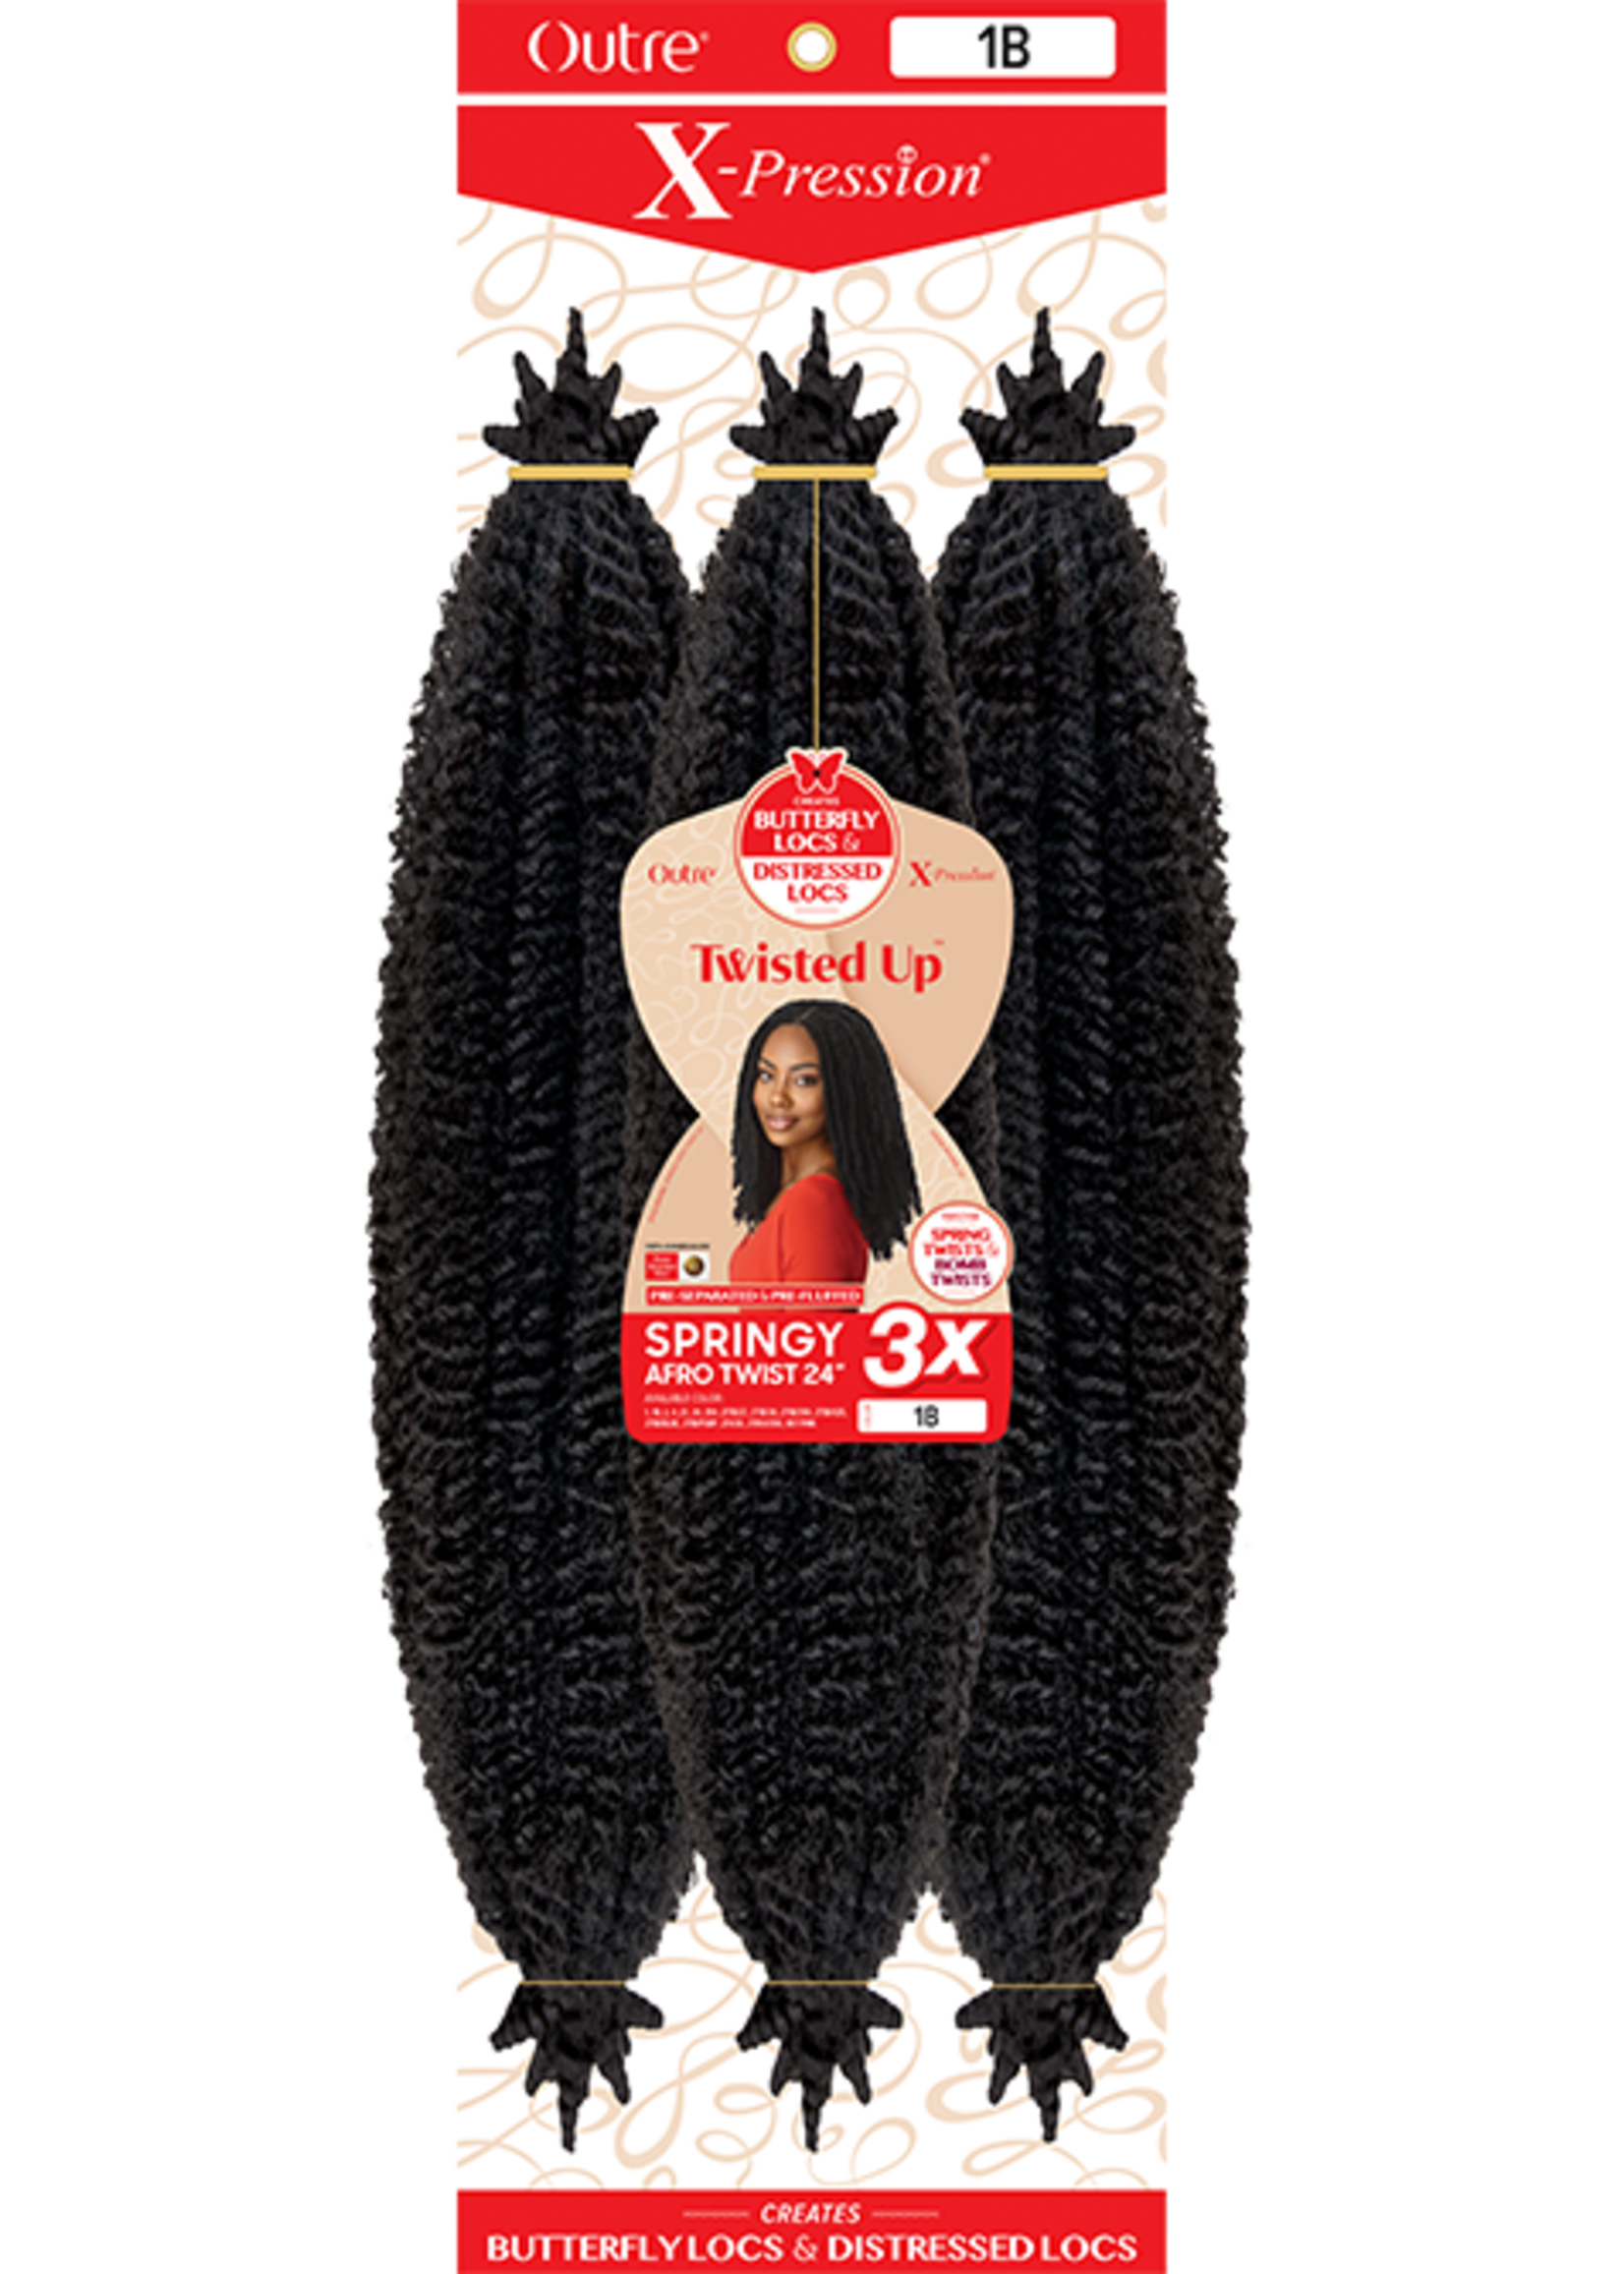 Outre Xpression Springy Afro Twist 1b 24"